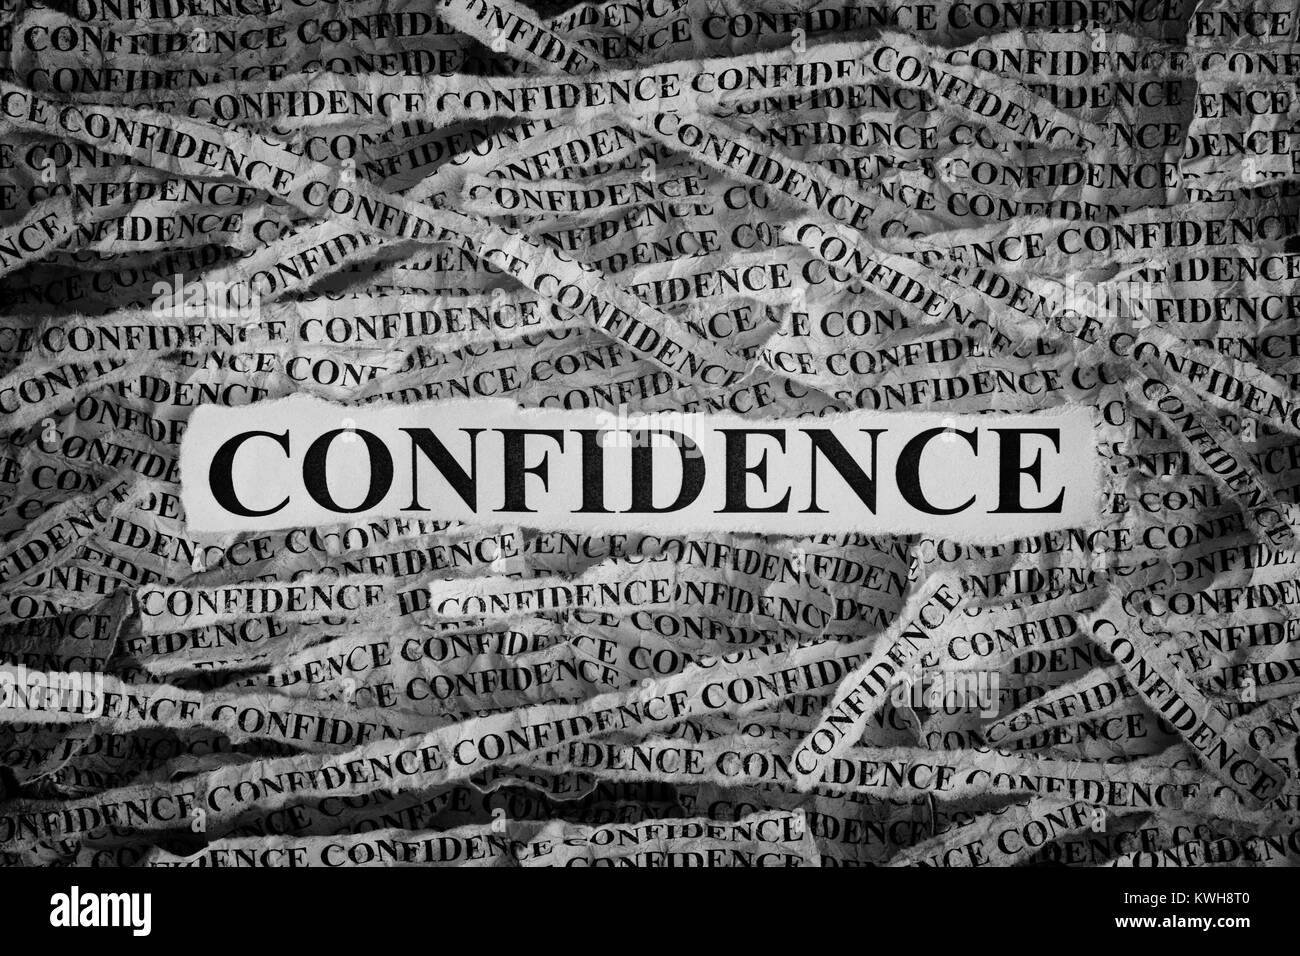 Confidence. Torn pieces of paper with word Confidence. Concept Image. Black and White. Closeup. Stock Photo